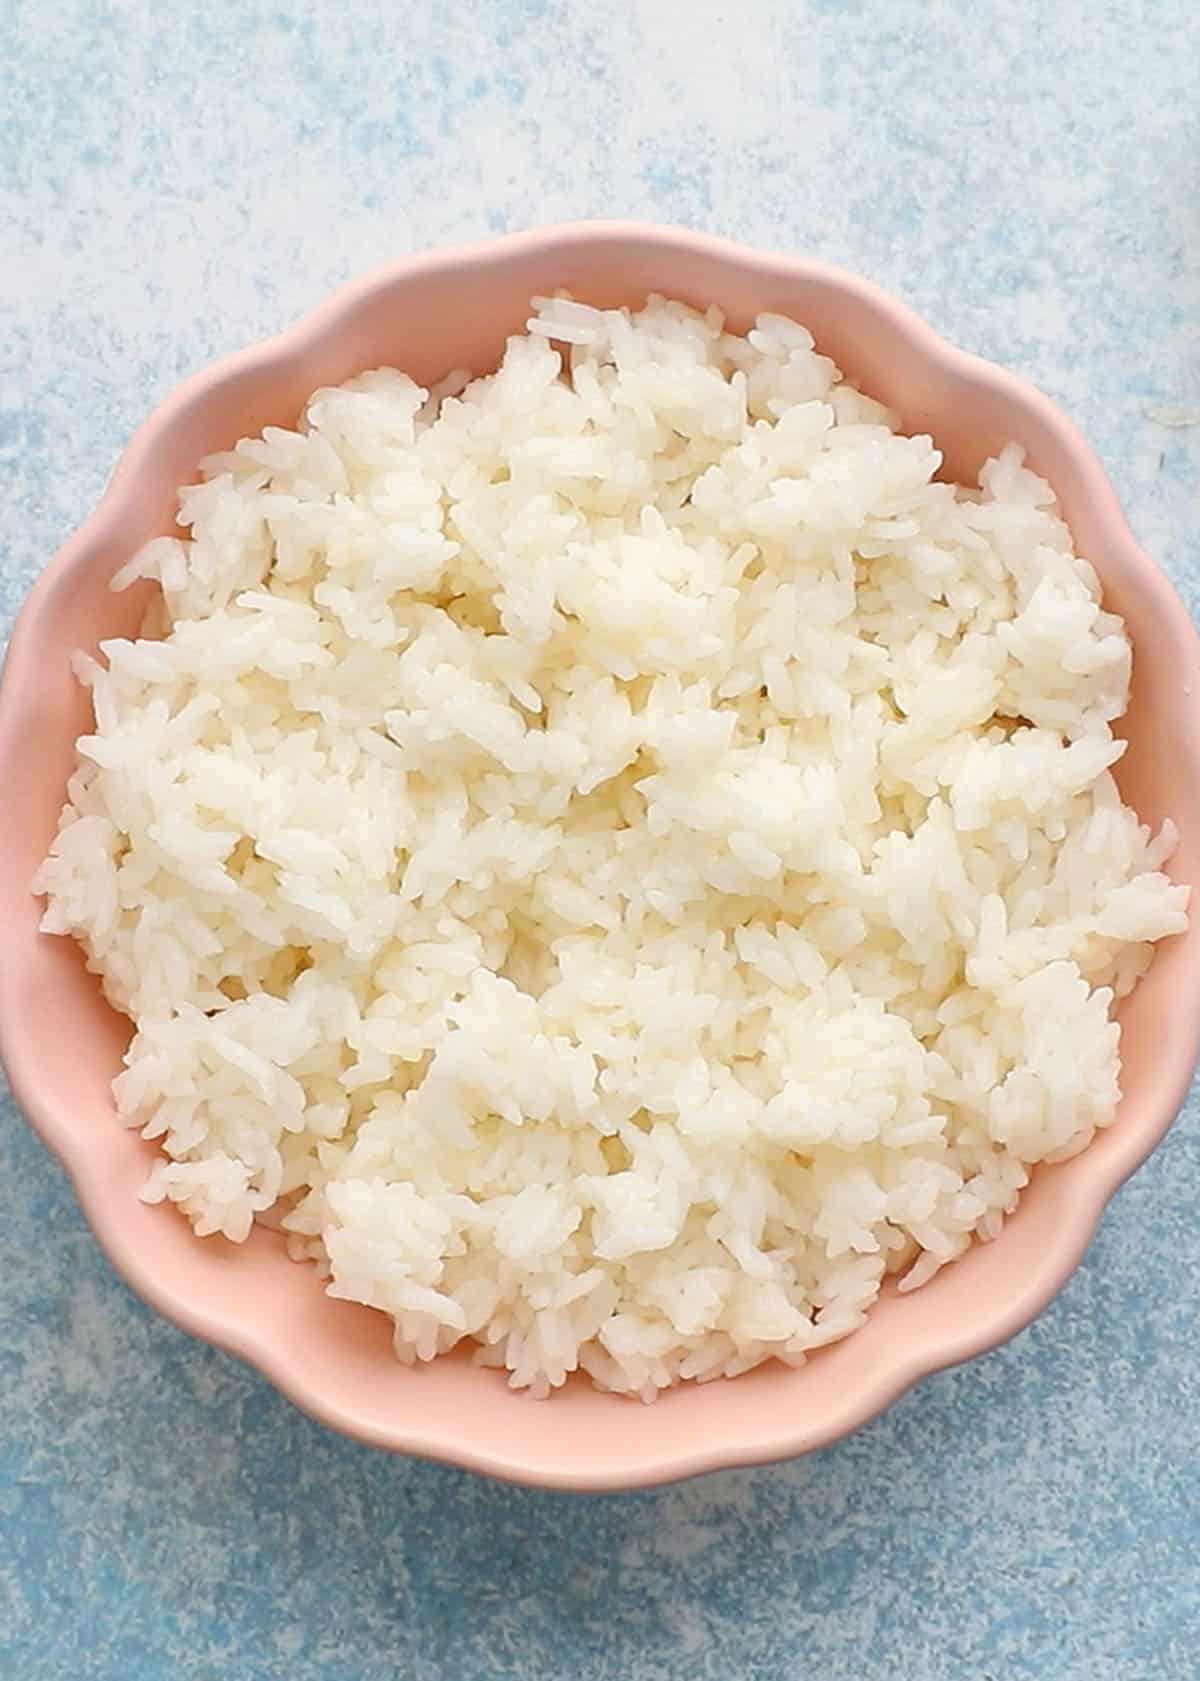 cooked white rice in a pink bowl.